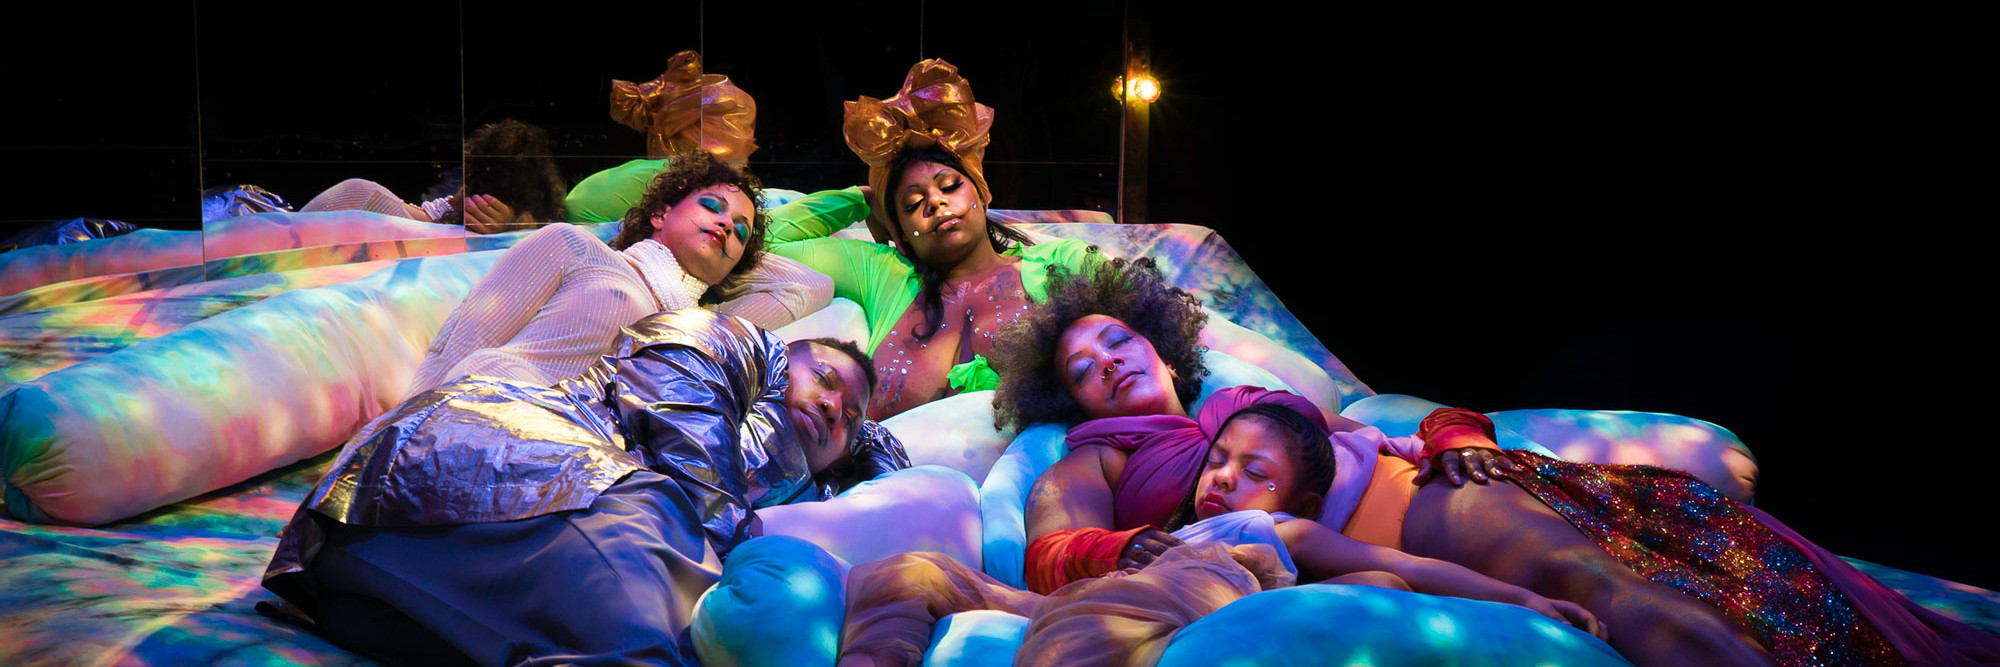 Black Power Naps installation at Performance Space, 2019. Courtesy of Black Power Naps. Photo: Avi Avion Image description: Four adults and one child sleep on colorfully dyed cushions under soft, dappled lighting.